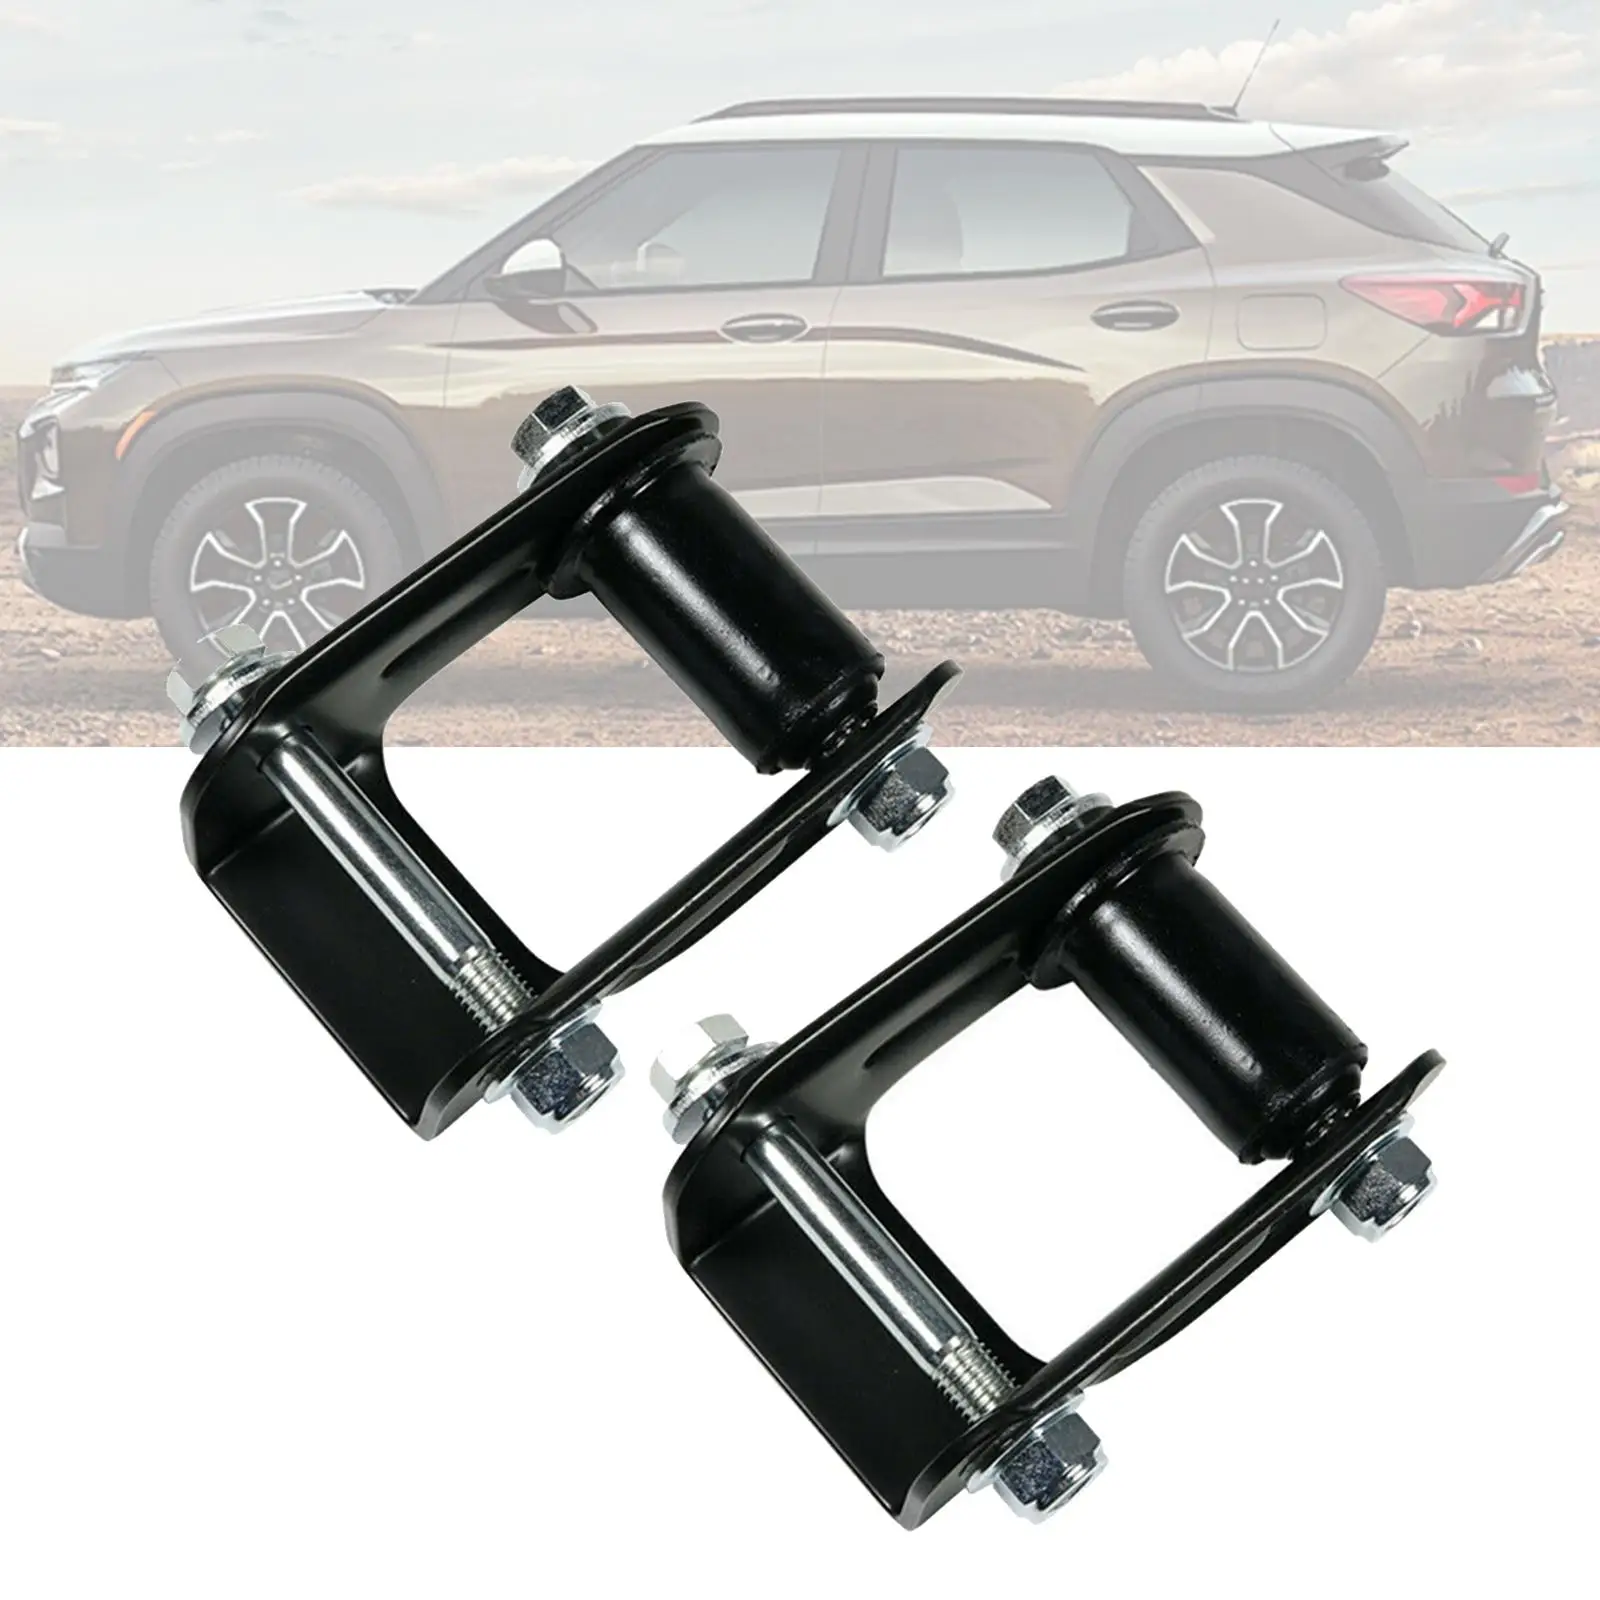 2Pcs Leaf Spring Shackle Kit Convenient Installation 15665302 Glossy Appearance 722-028 for Chevrolet S10 Pickup S10 Blazer